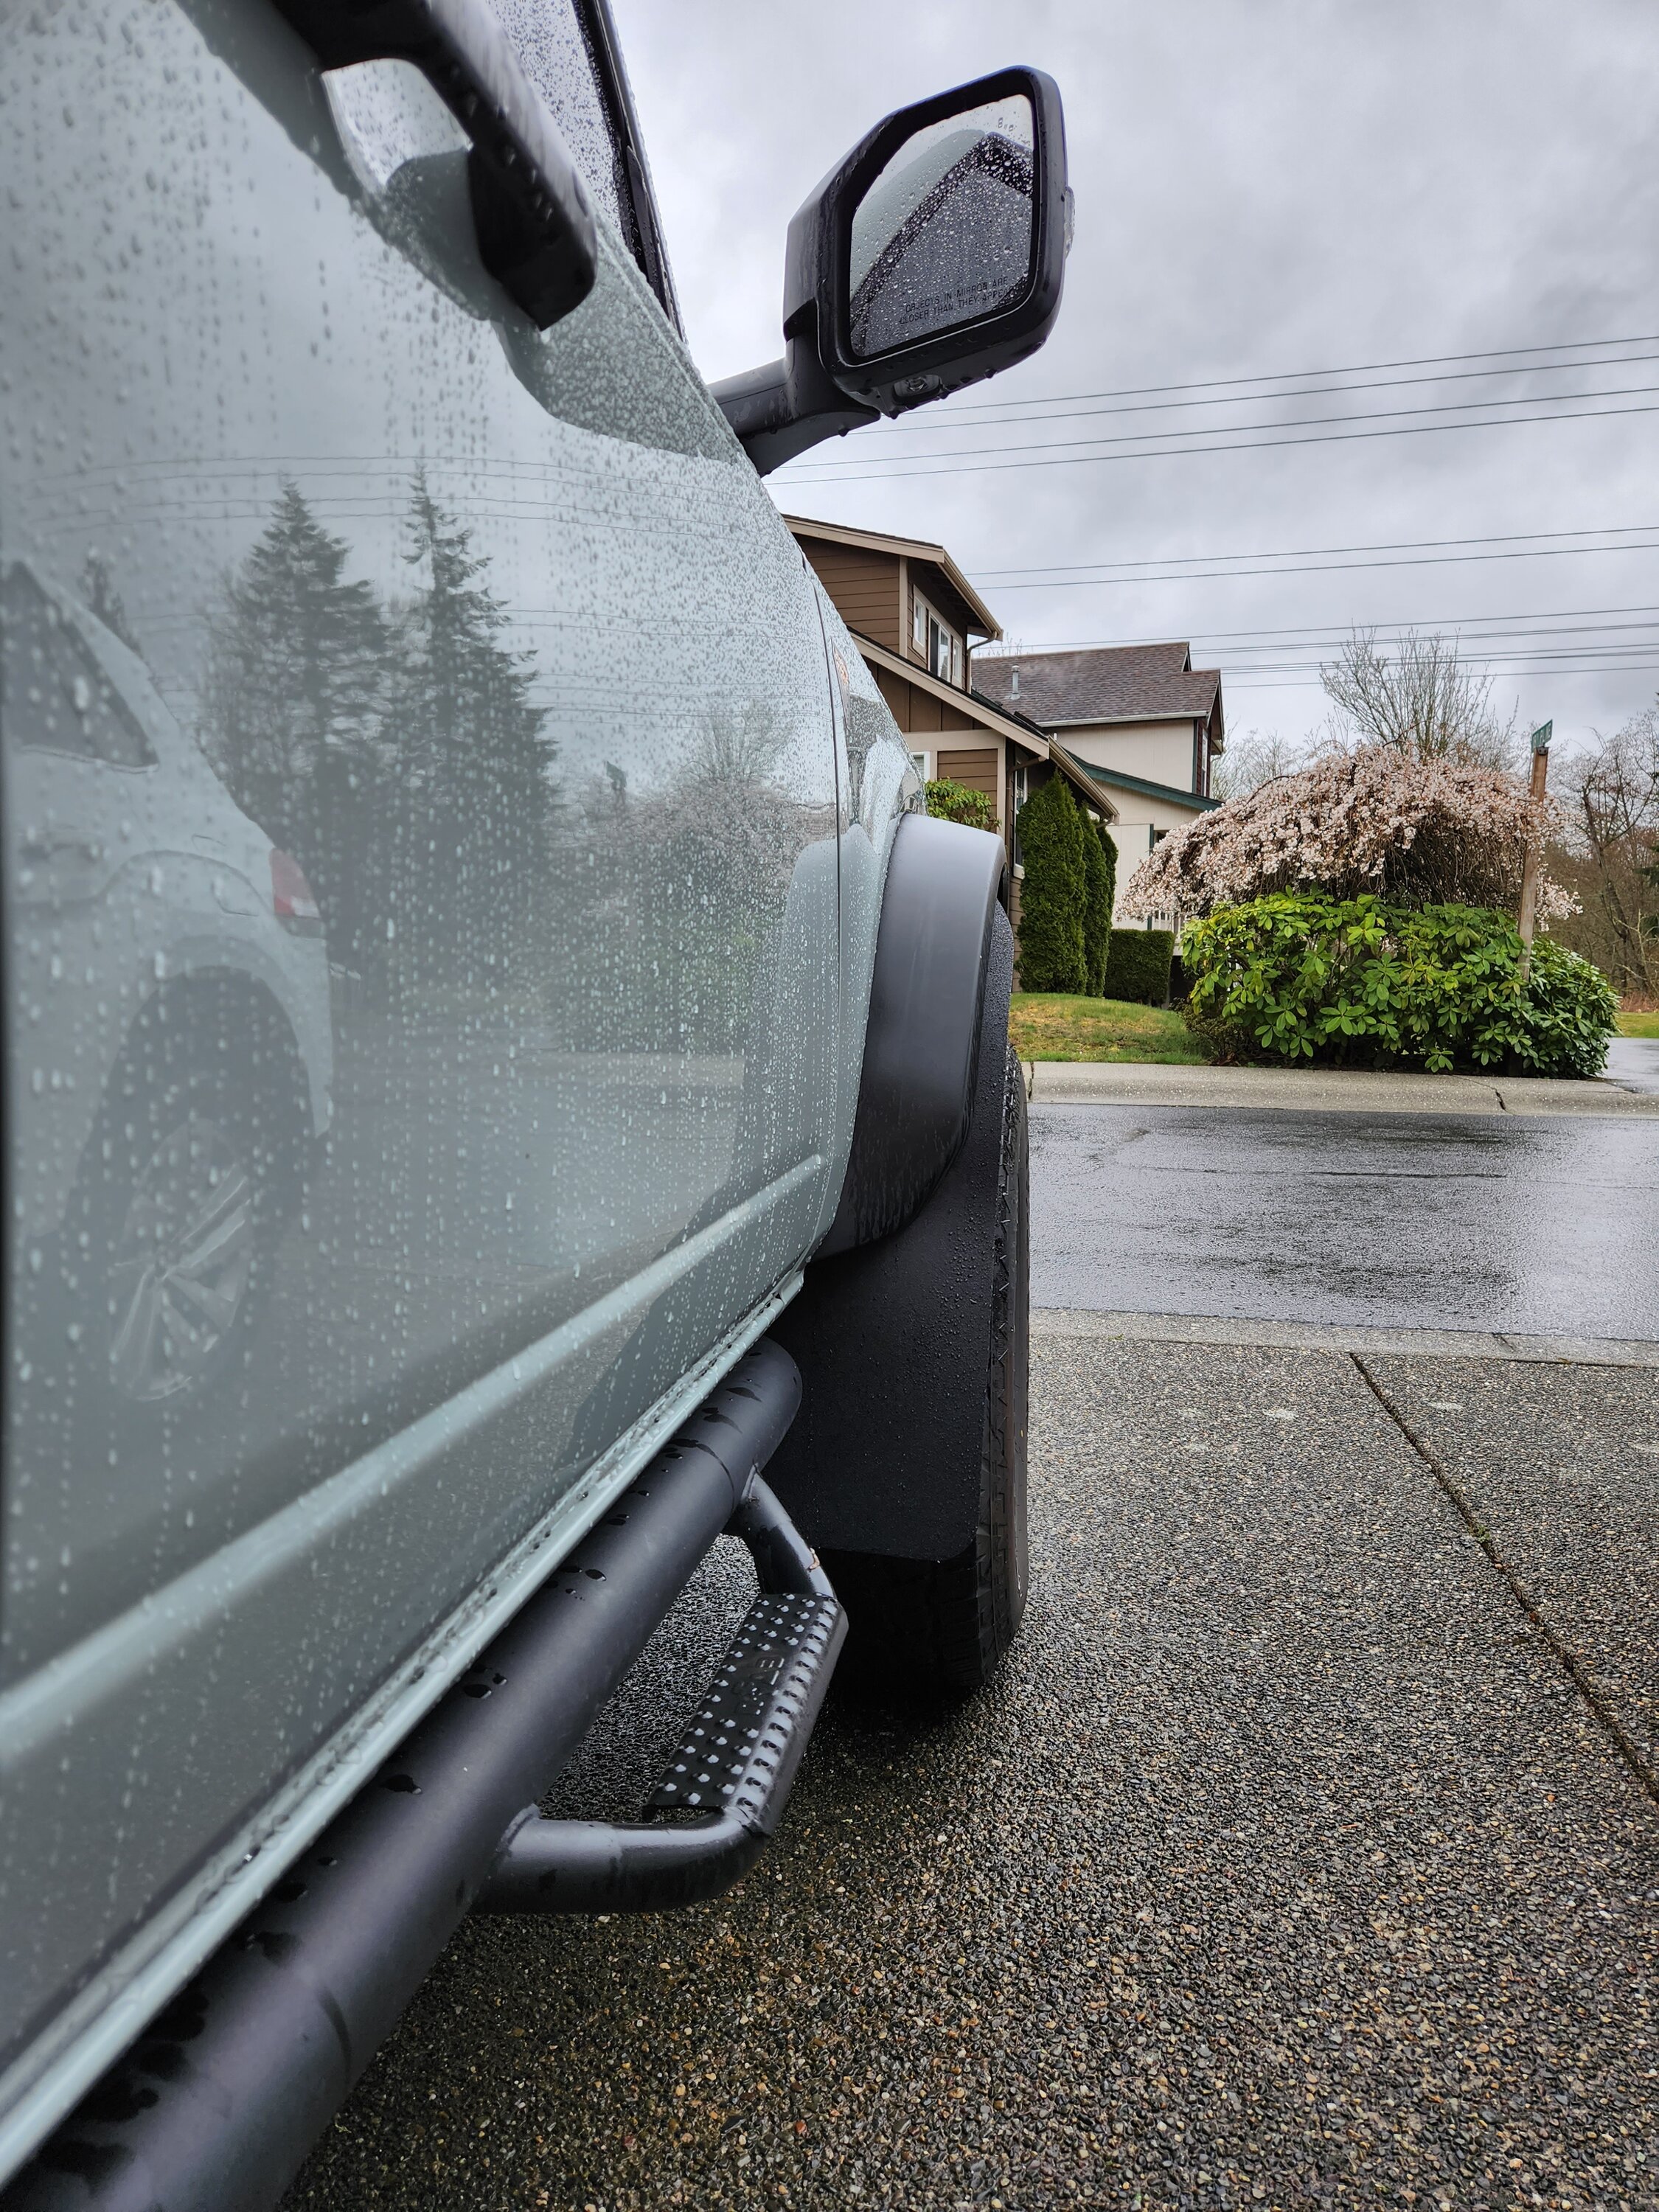 Ford Bronco Best mud flaps for a Sasquatch? 20230331_173055